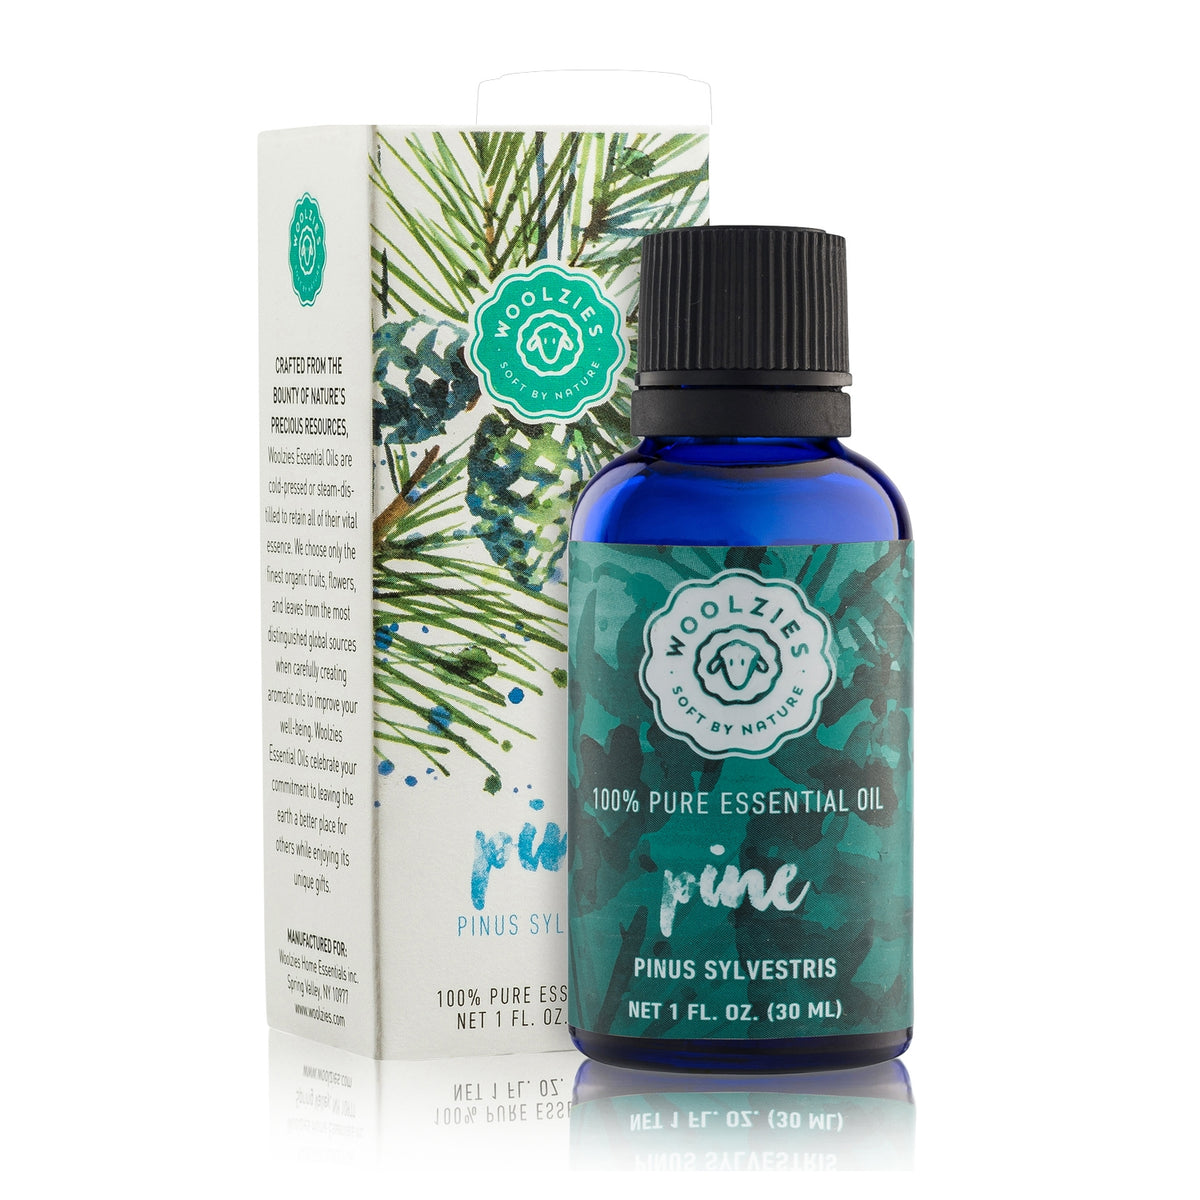 A bottle of Woolzies Pine Essential Oil, diffused with a dark blue label next to its packaging box decorated with green pine illustrations. The label and box display product information.